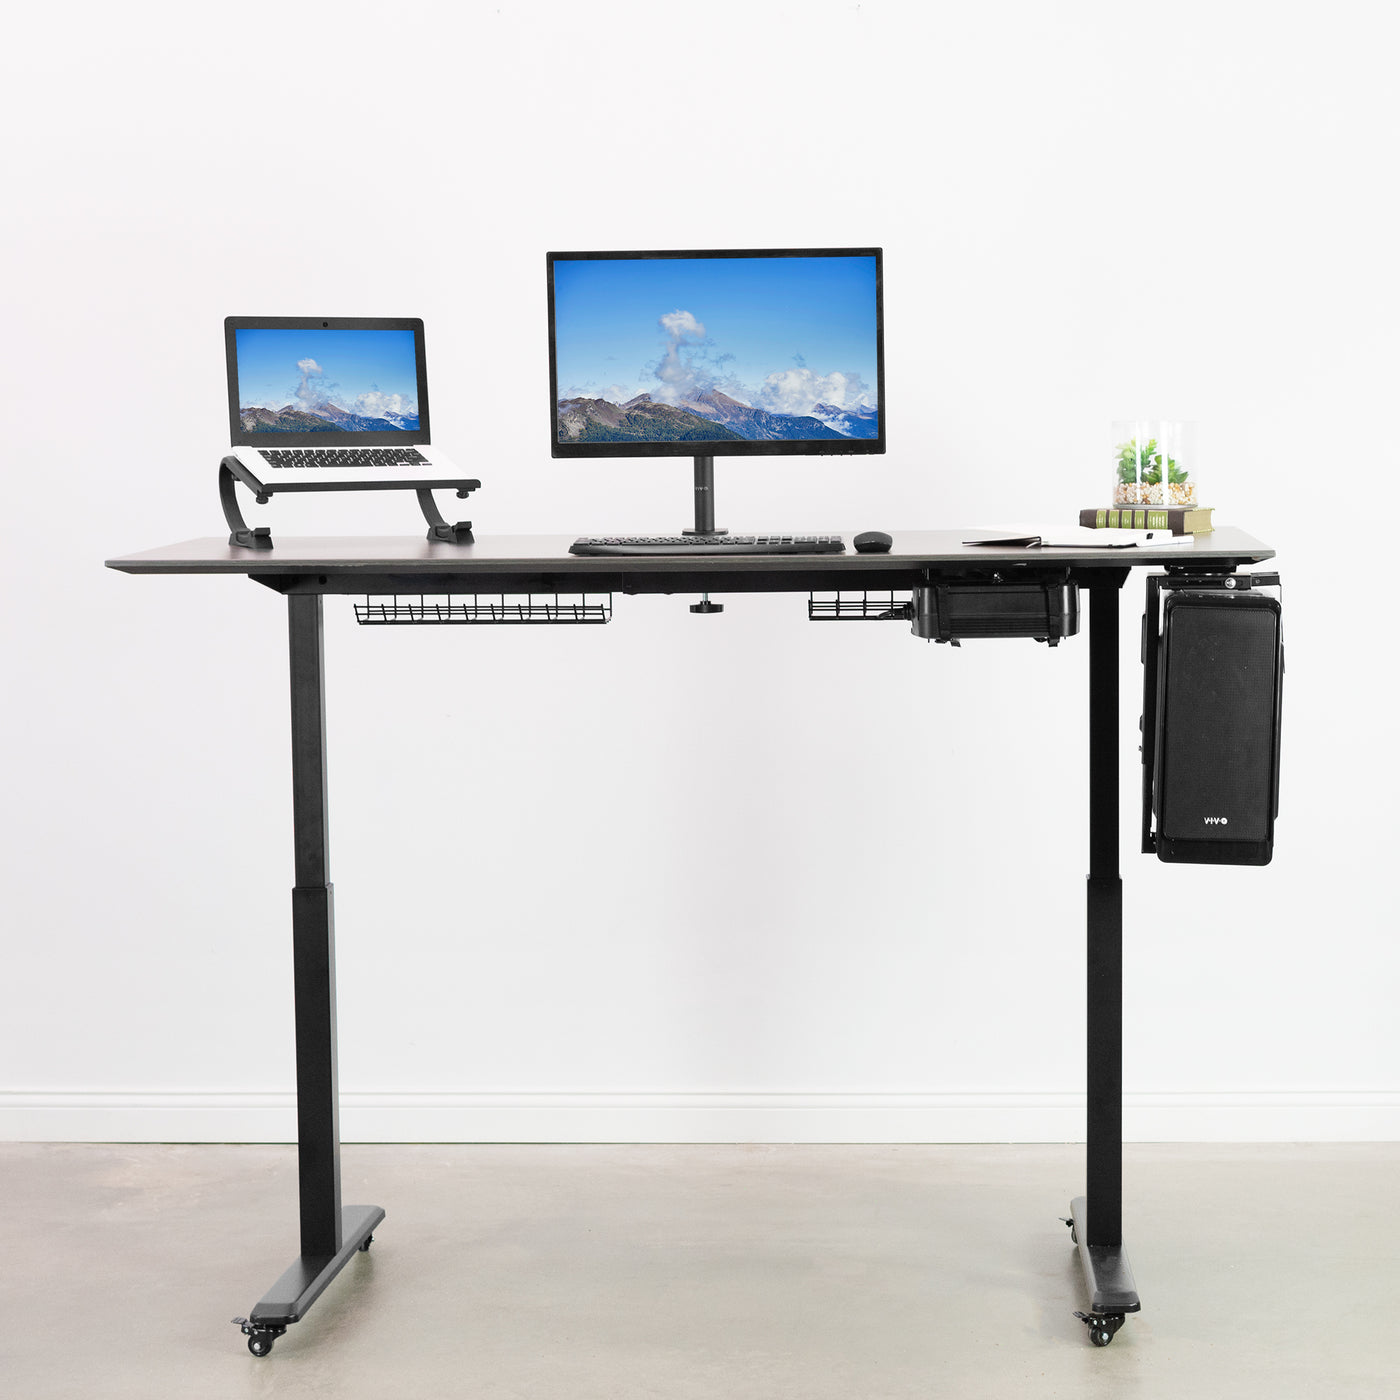 Under Desk Adjustable Strap PC Mount – VIVO - desk solutions, screen  mounting, and more